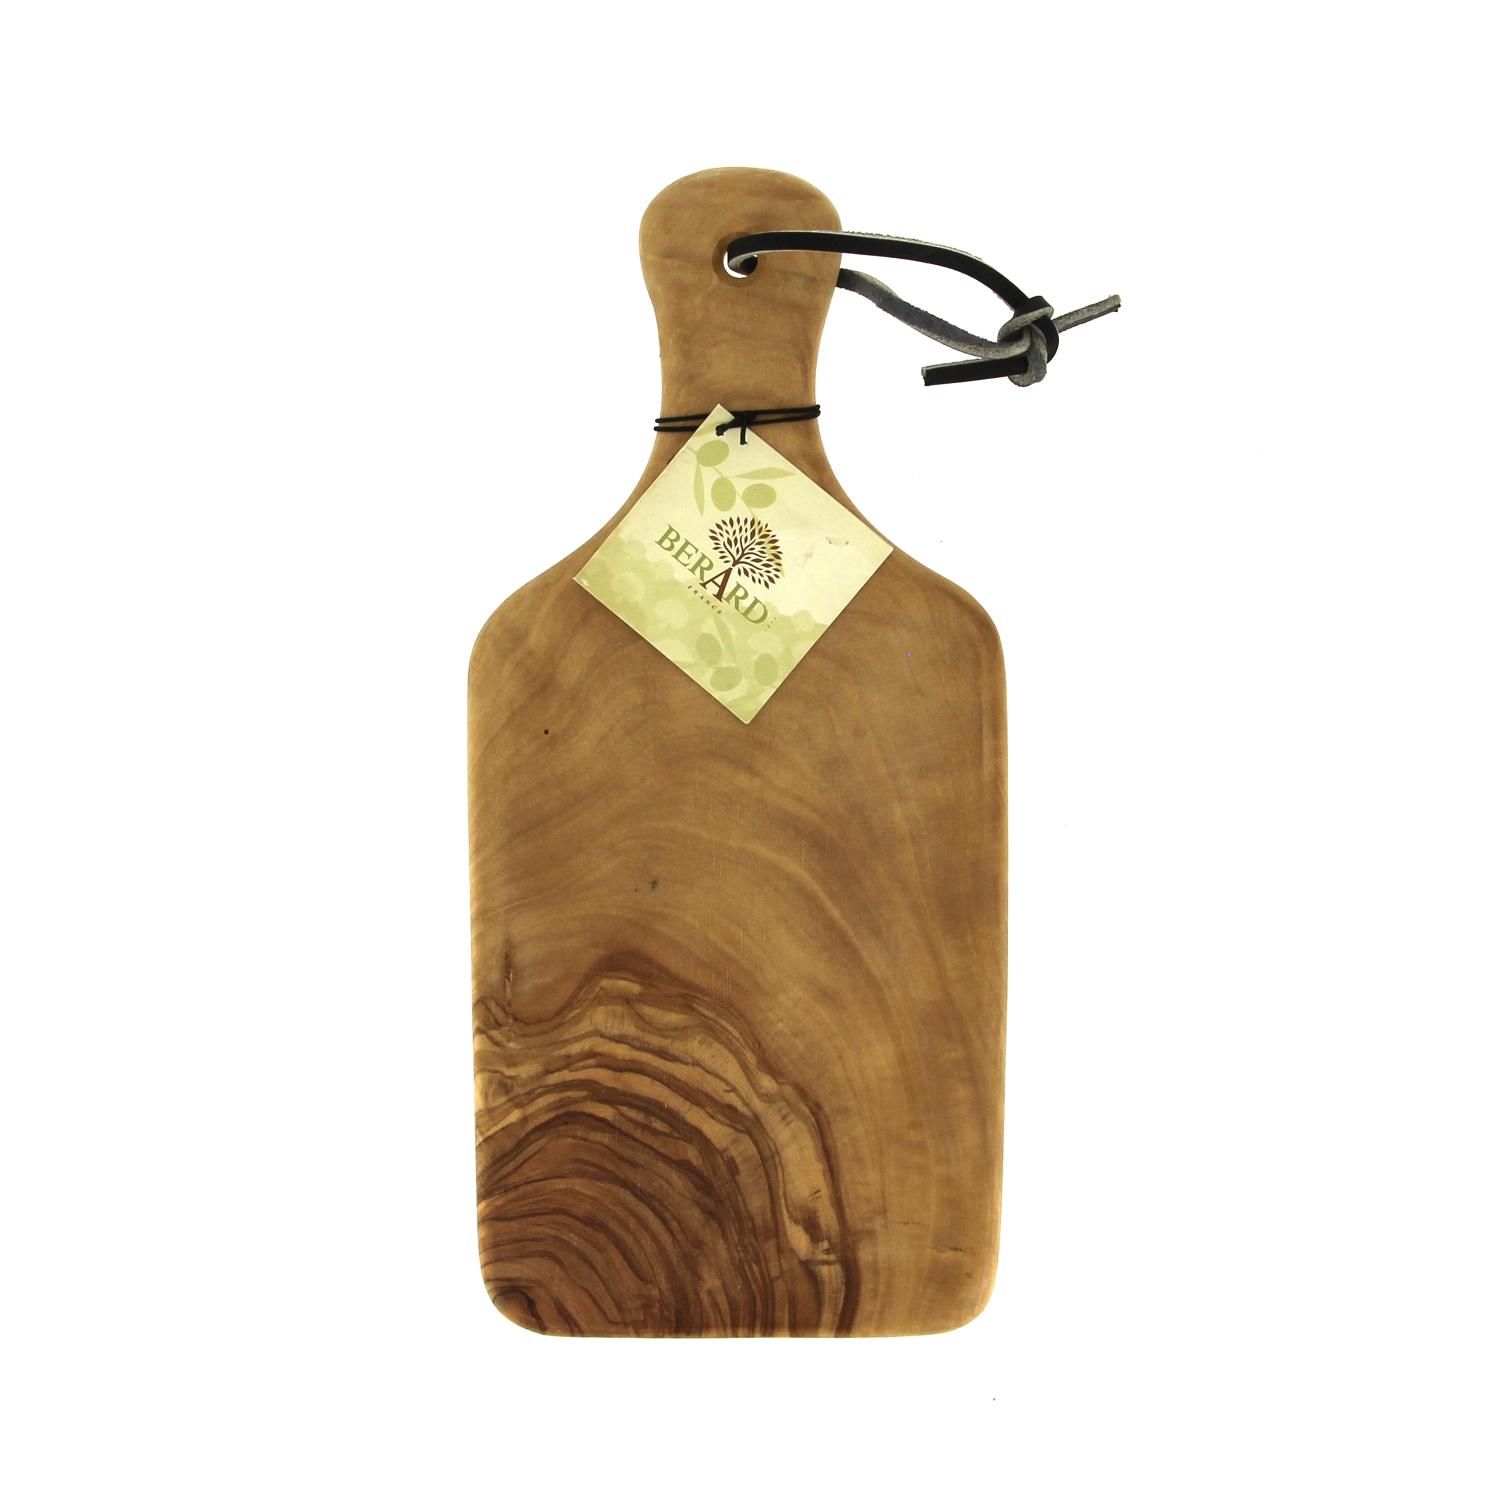 Chopping board in Olive wood with handle - Medium